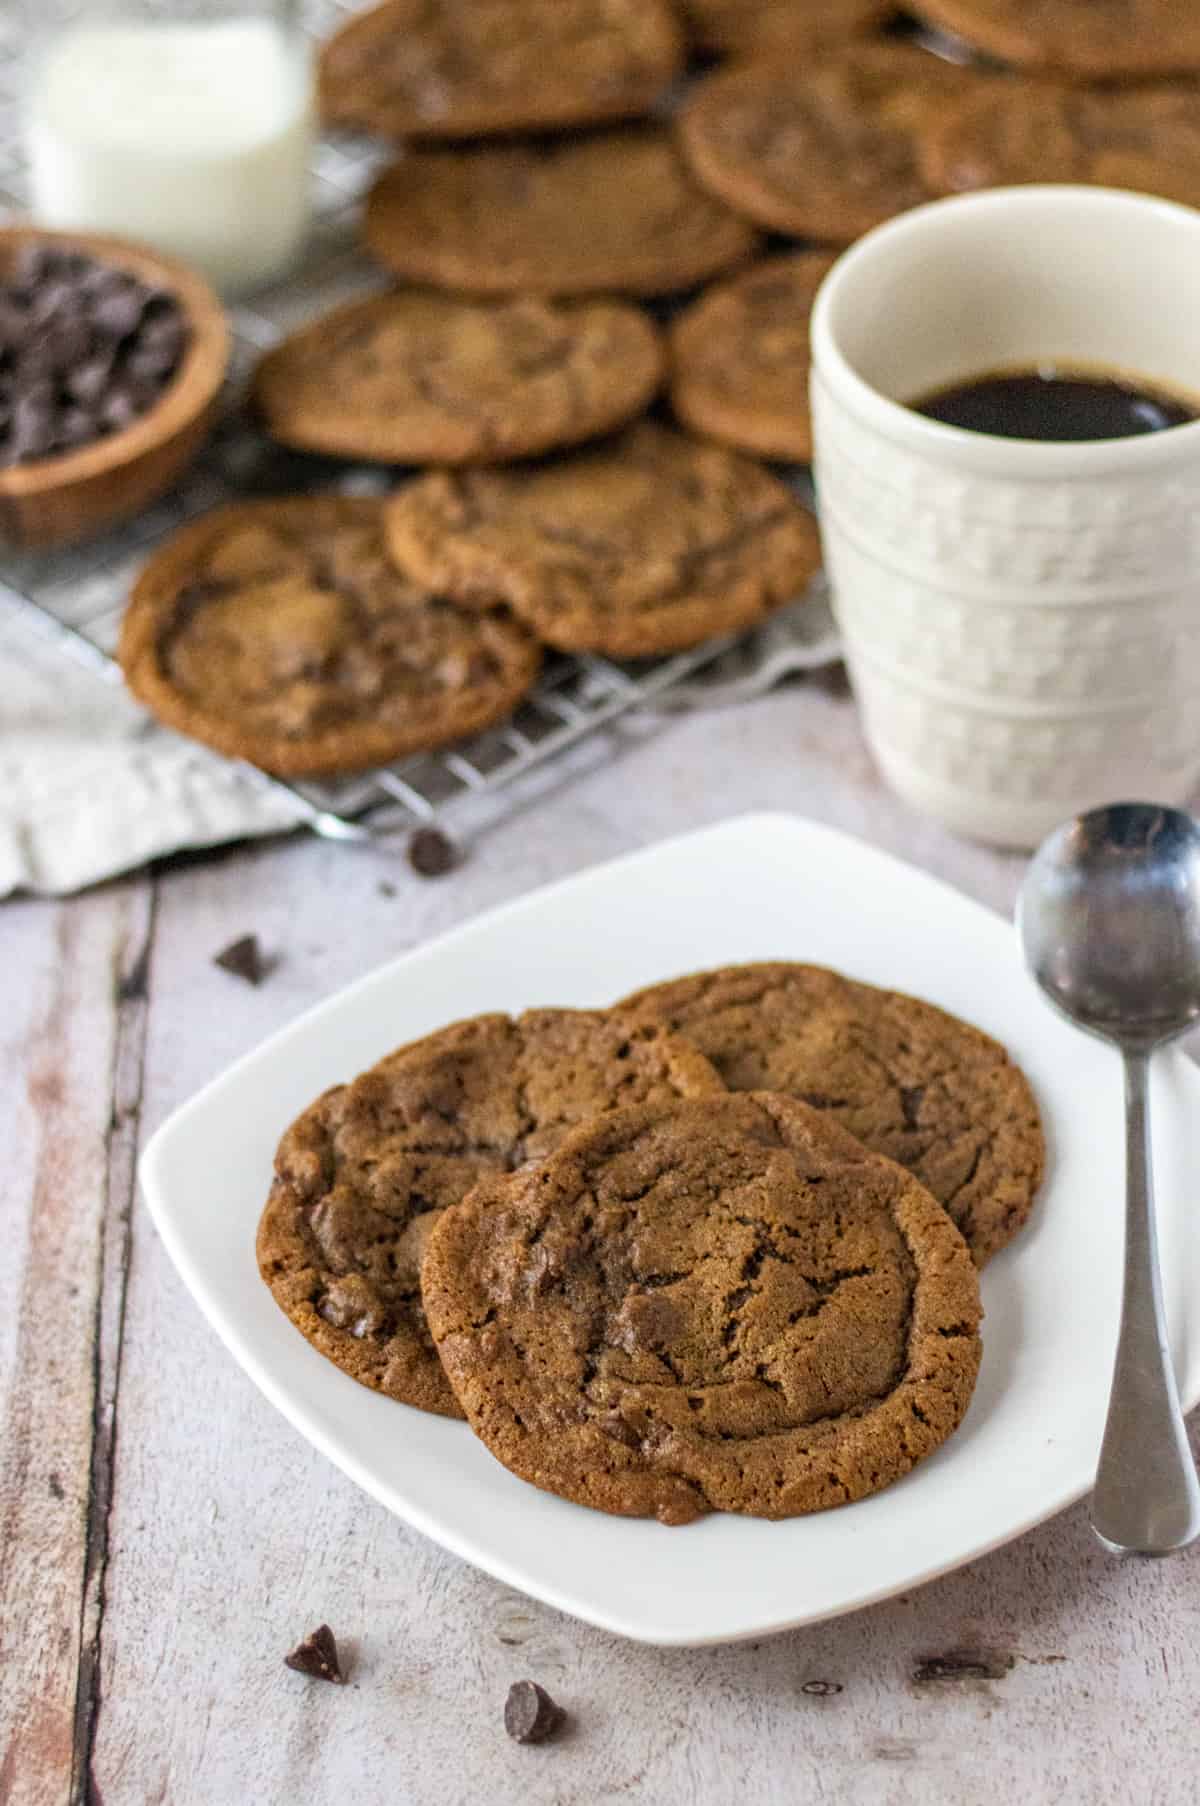 Coffee cookies on a plate next to a mug of coffee and more cookies in the back.